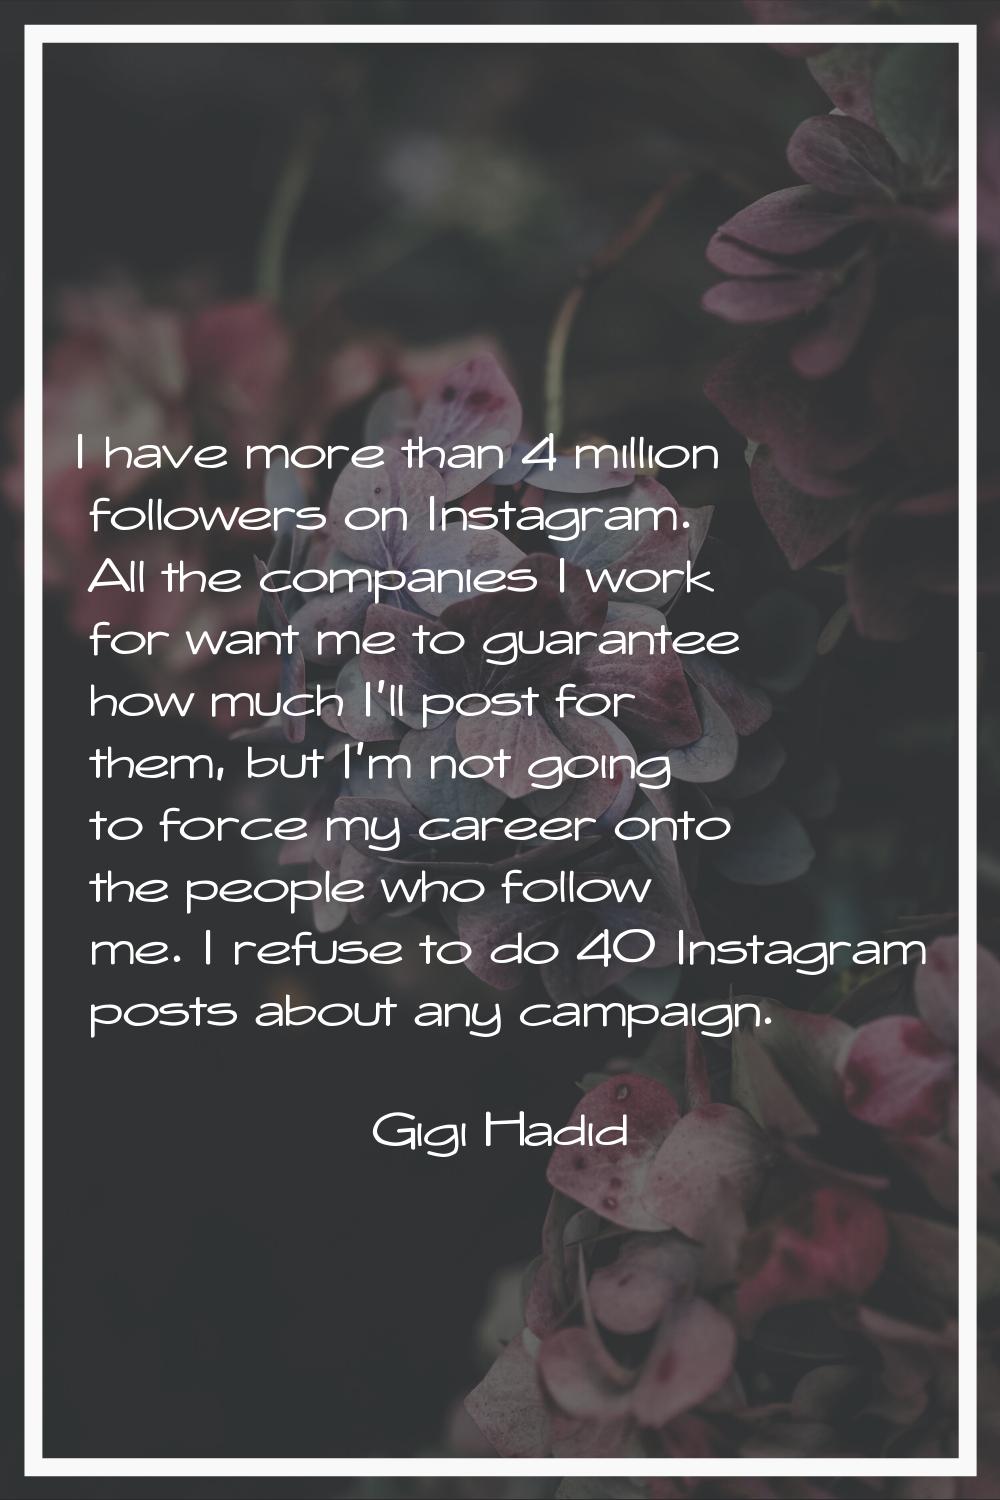 I have more than 4 million followers on Instagram. All the companies I work for want me to guarante